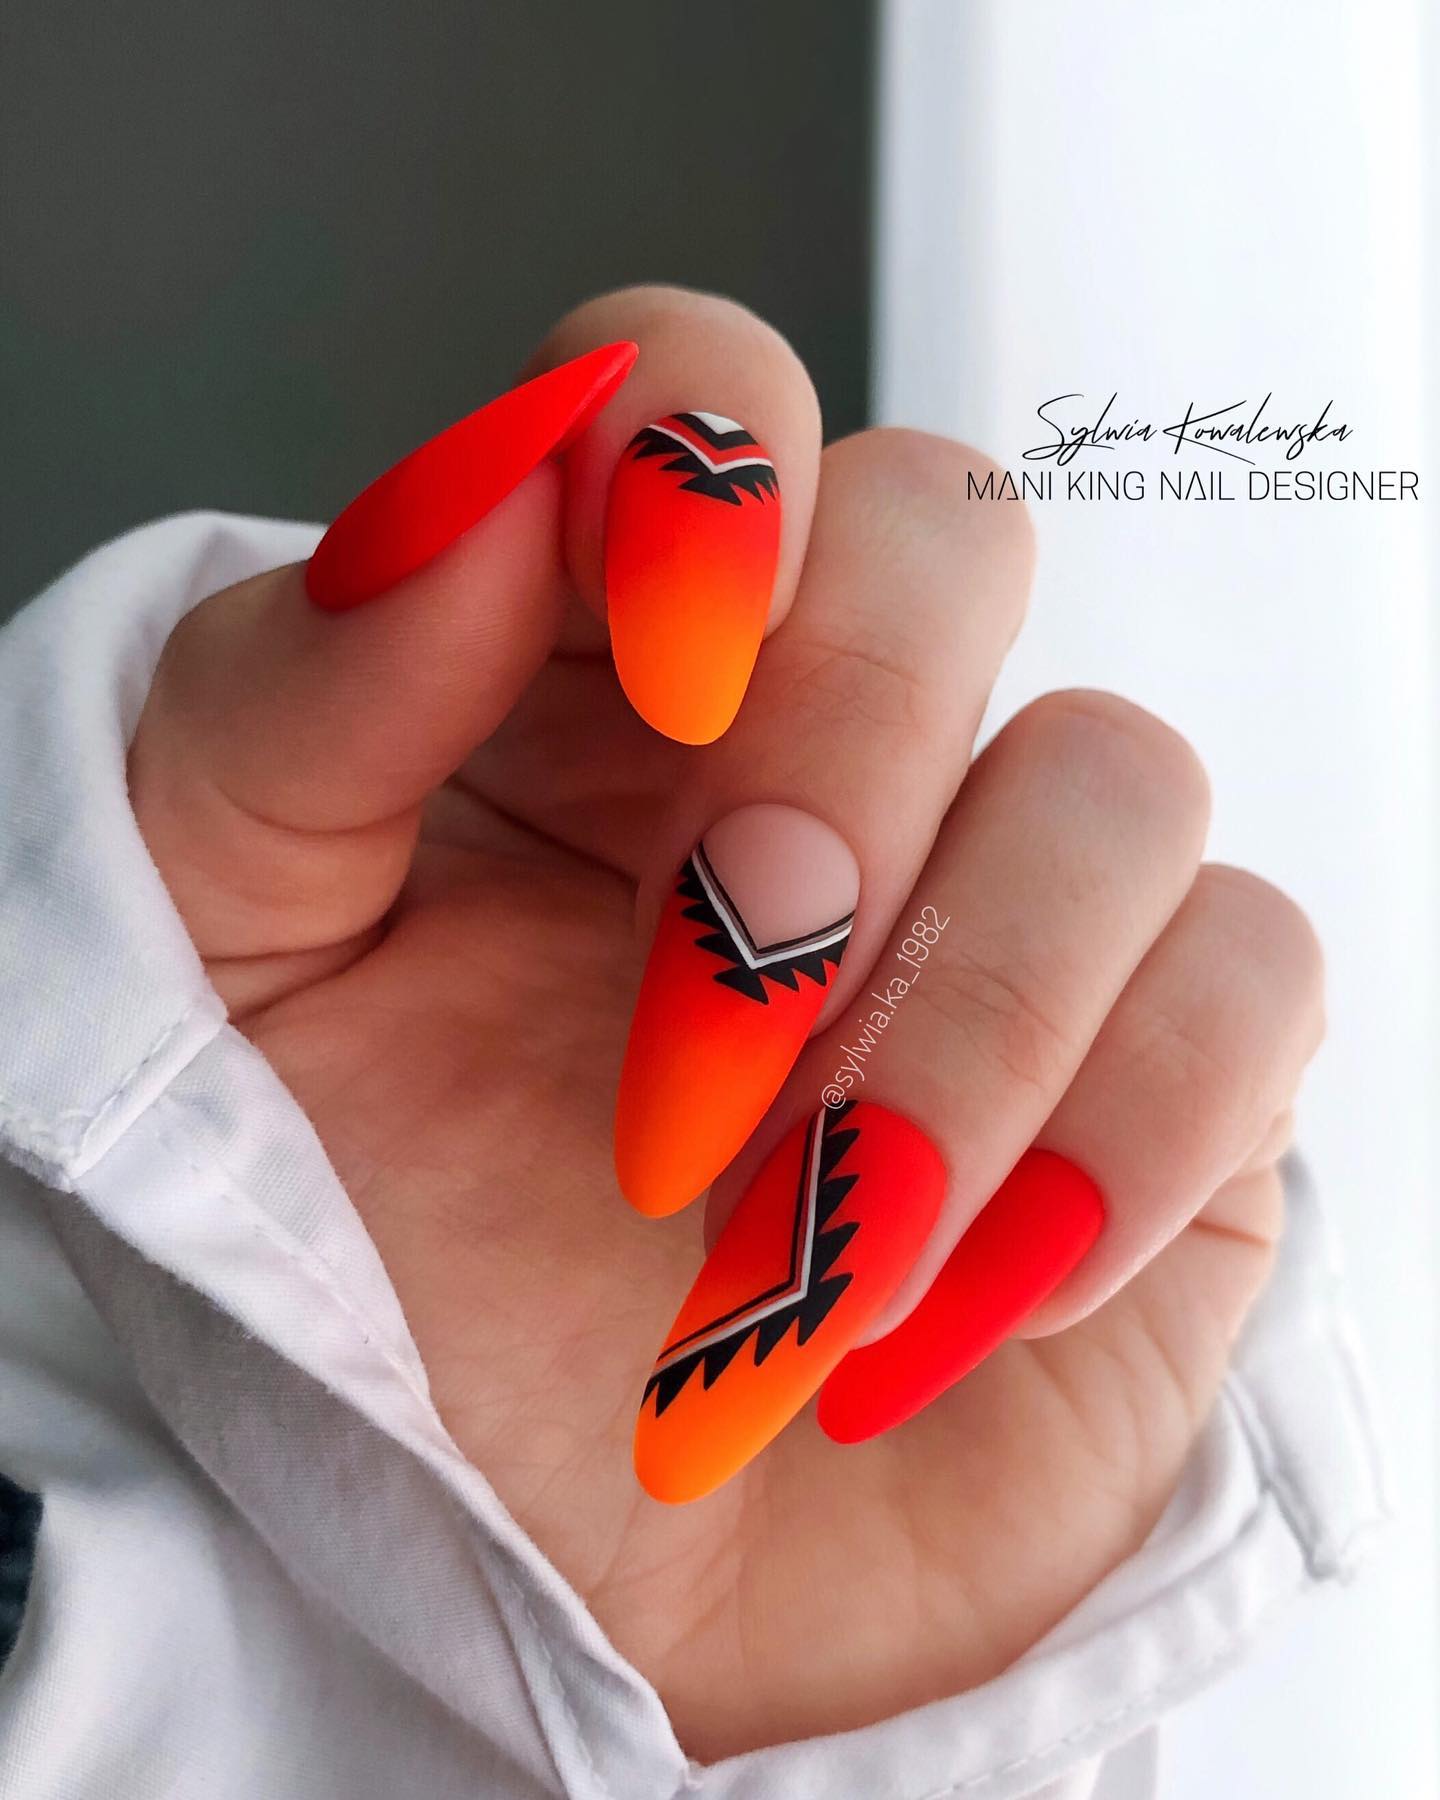 Especially for summer, one of the best nail designs is neon nails. They help you stand out everywhere and every time. Orange is a very strong color, so why don't you get a matte look of this energizing color? Geometrical shapes can give it an extra beauty, too.